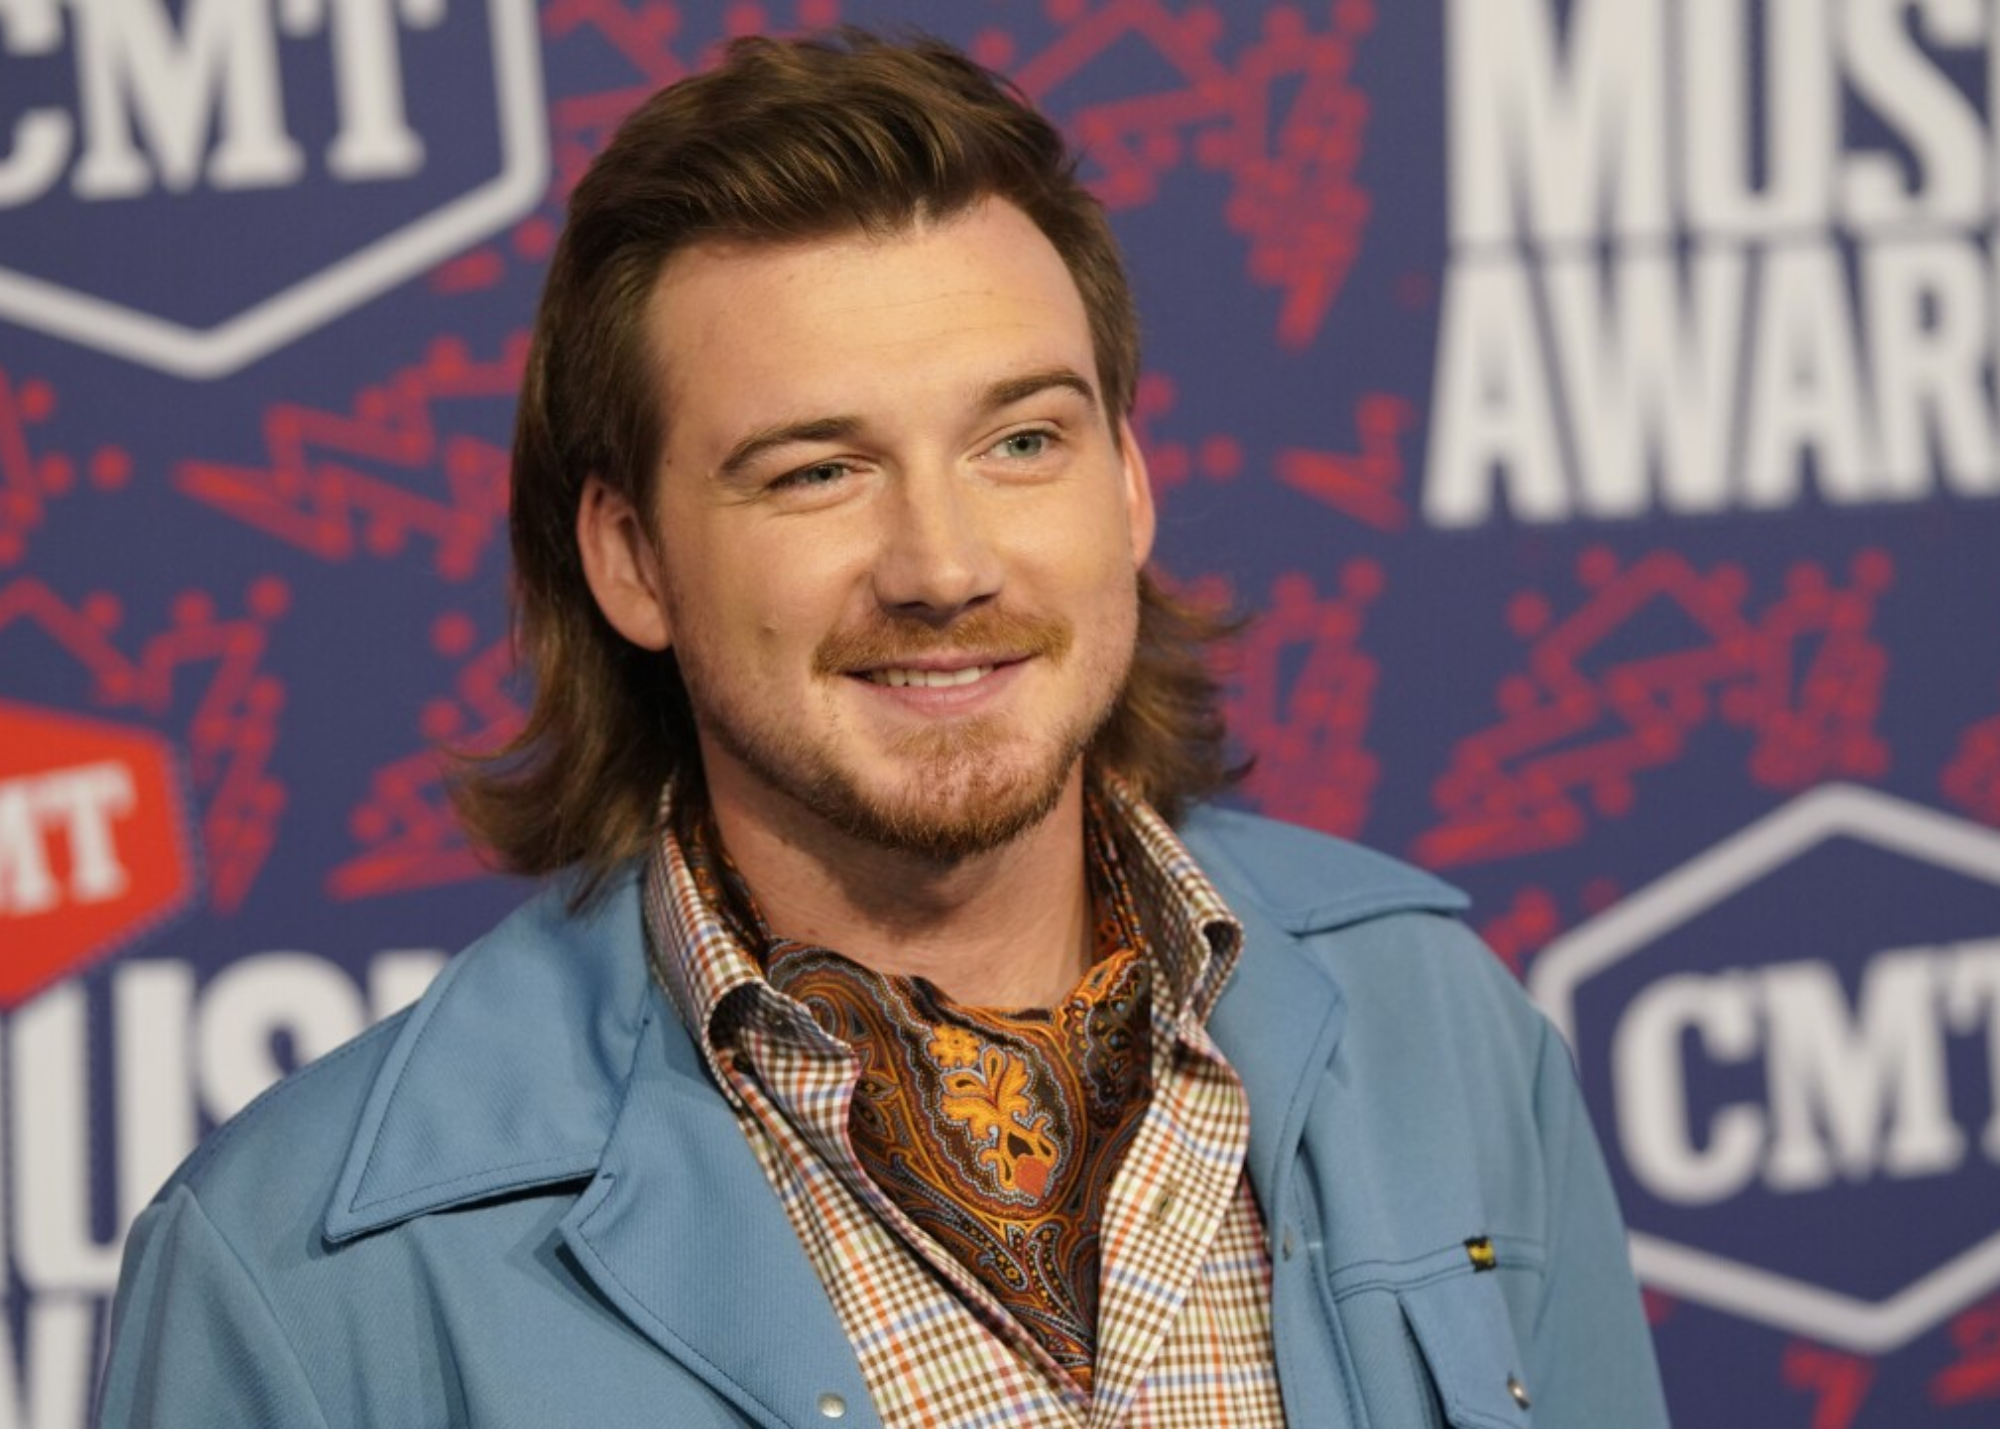 Morgan Wallen is smiling to the camera while wearing skyblue-colored coat